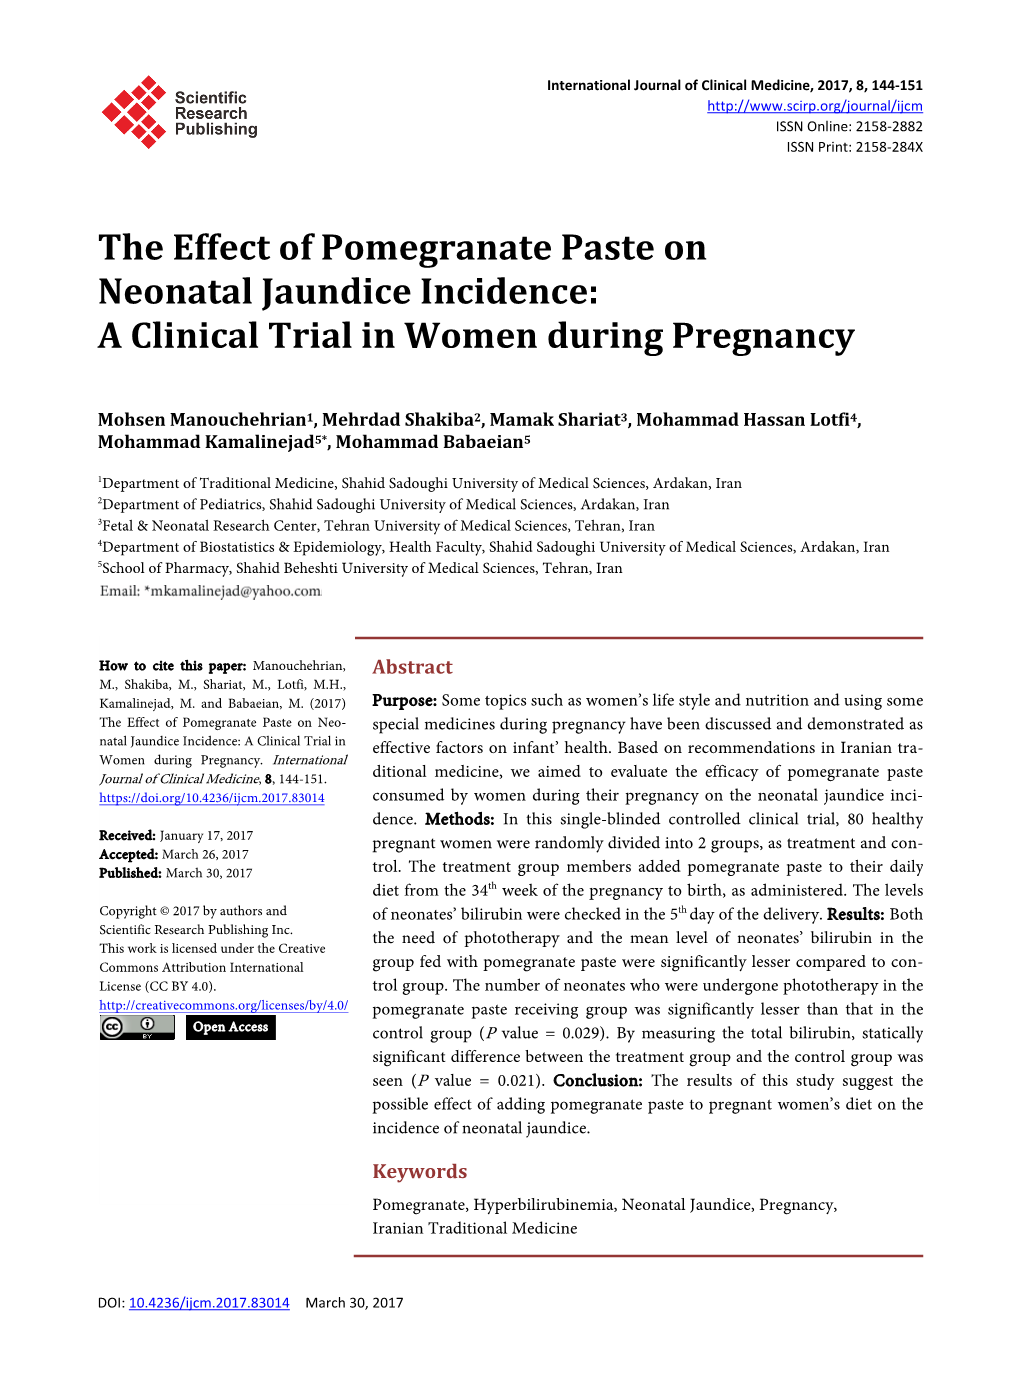 The Effect of Pomegranate Paste on Neonatal Jaundice Incidence: a Clinical Trial in Women During Pregnancy